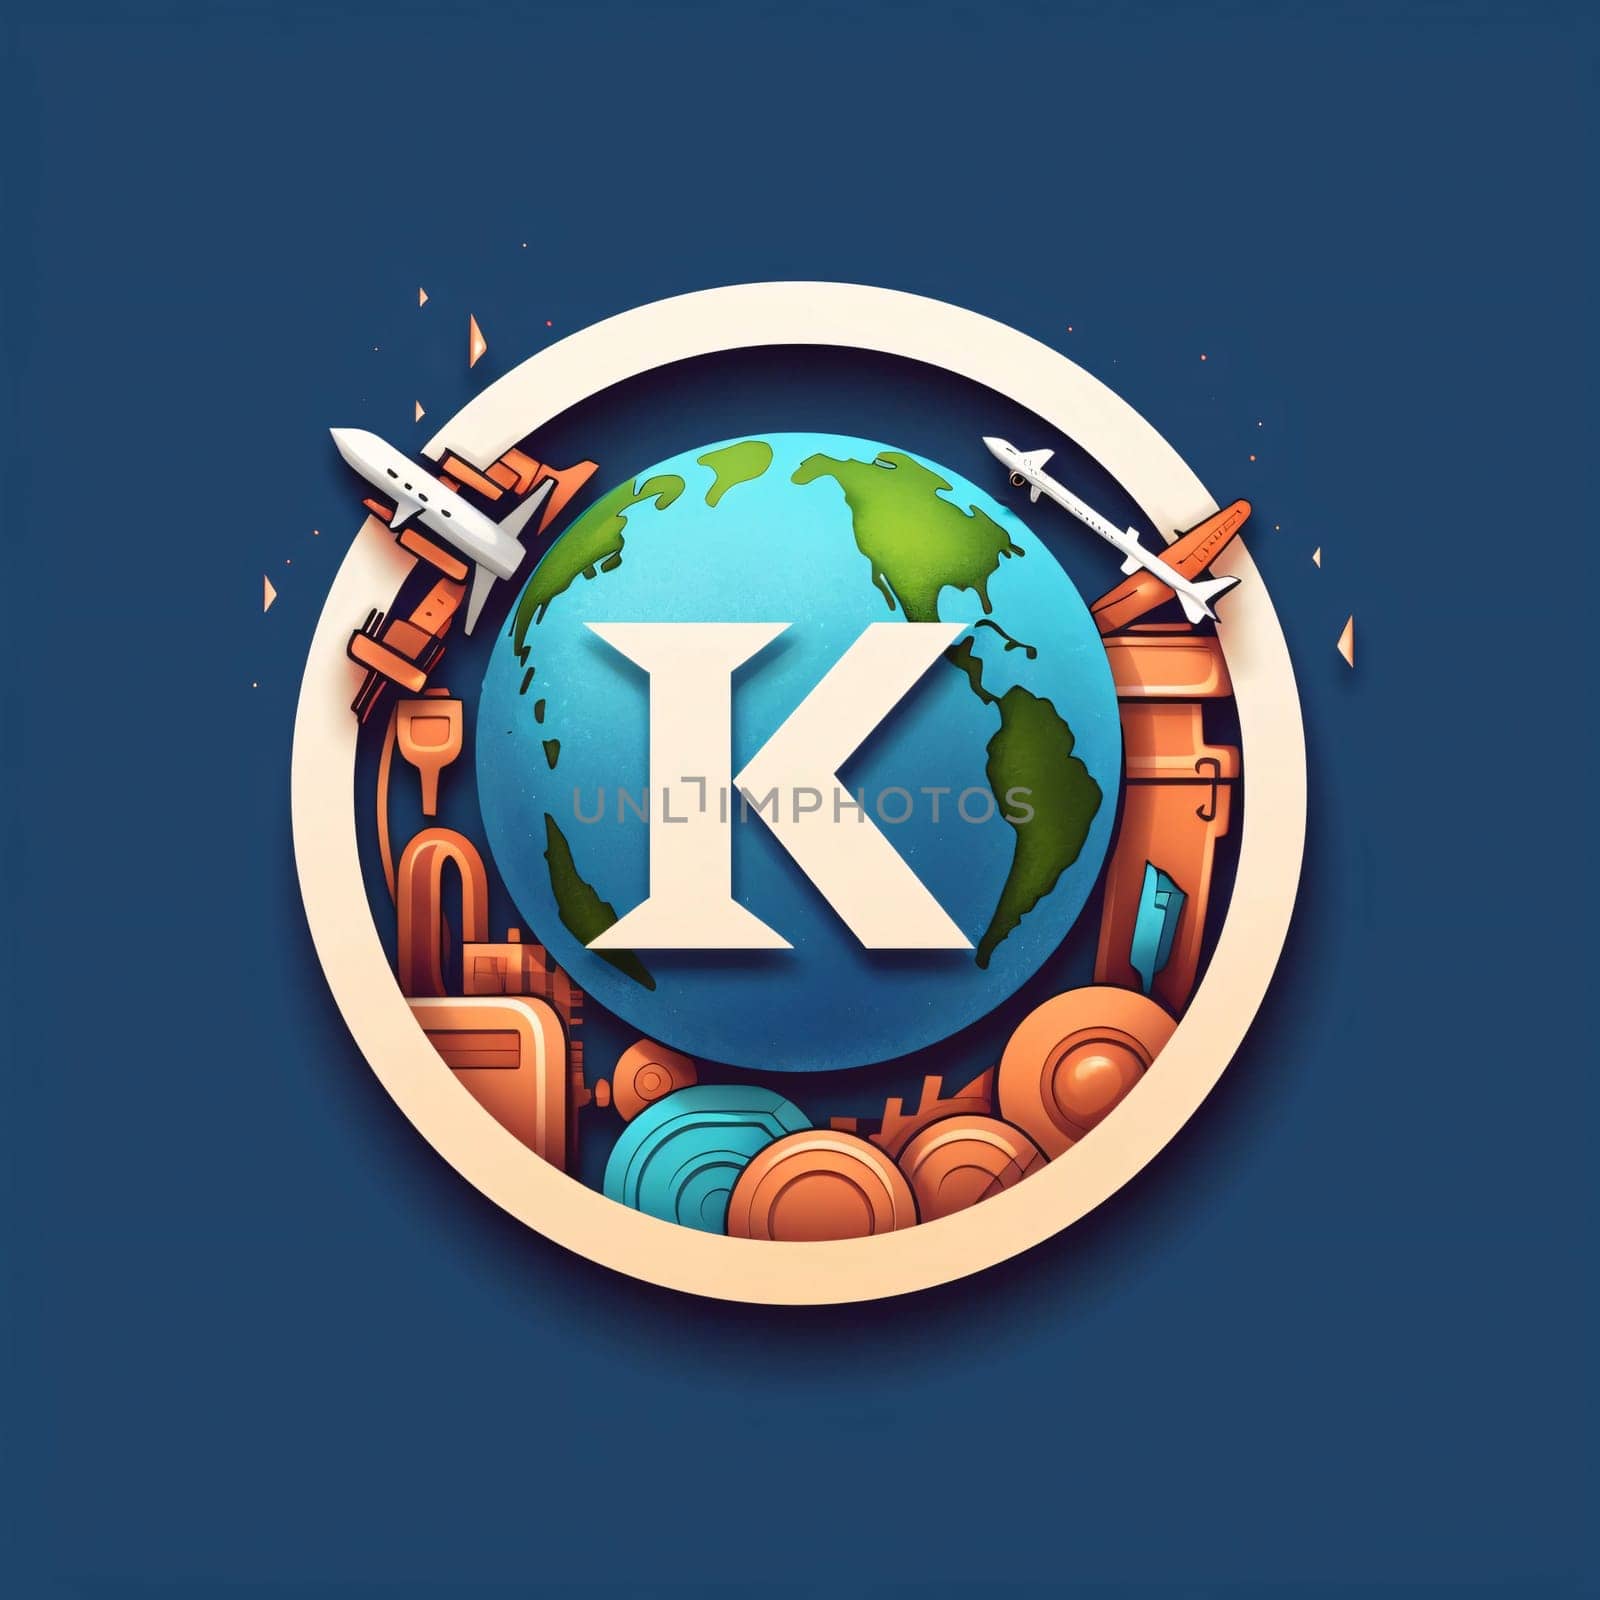 Graphic alphabet letters: Vector illustration of the planet Earth with the letter K in the center.